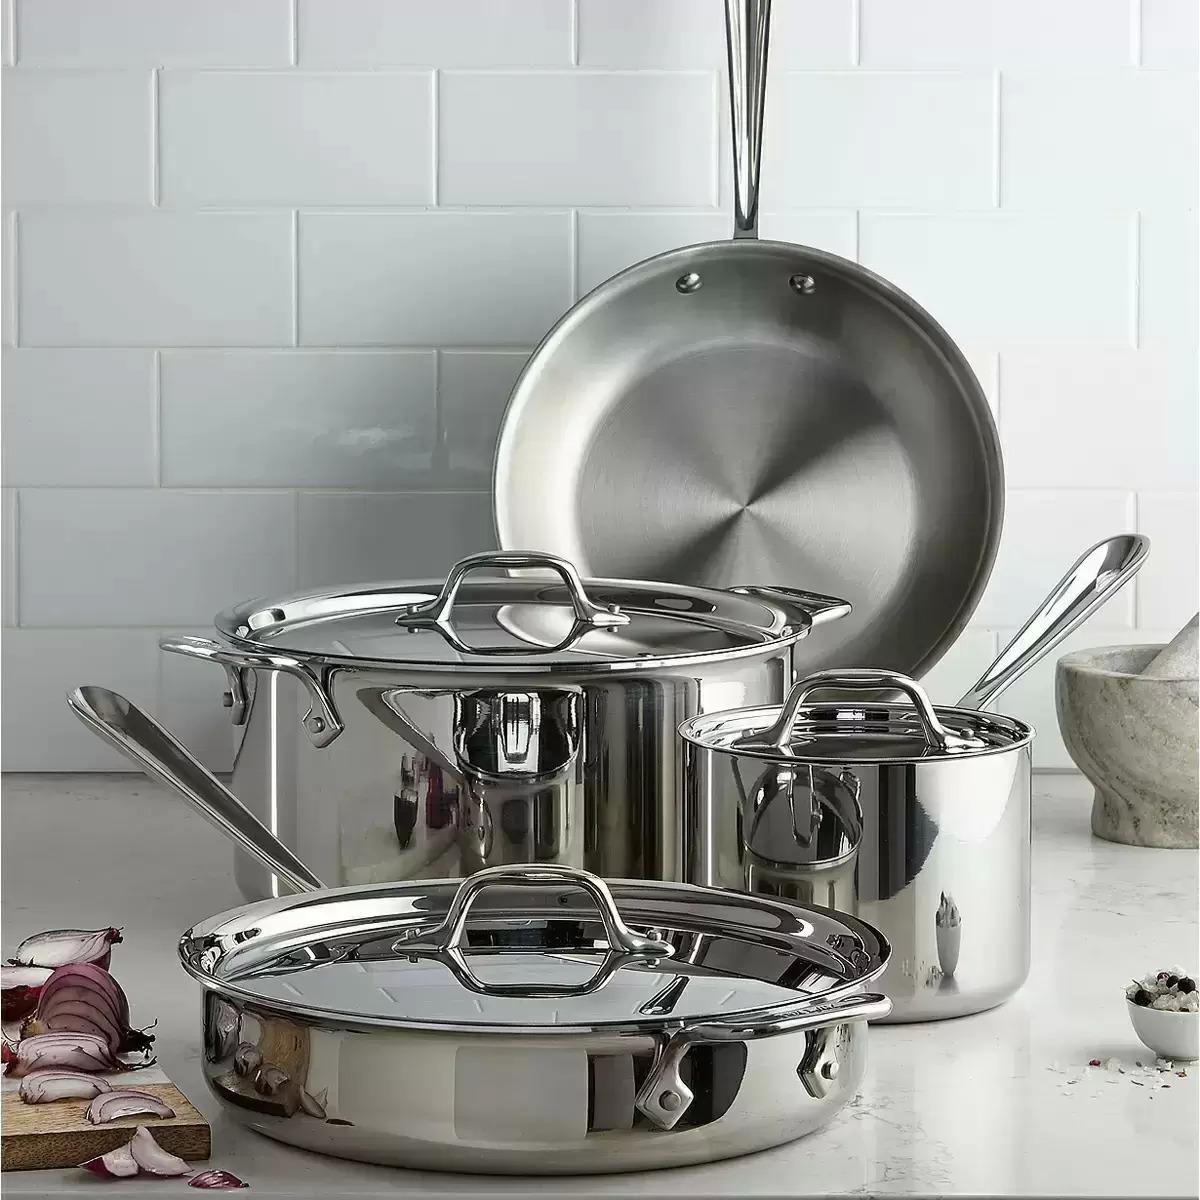 All-Clad Stainless Steel 7-Piece Cookware Set for $299.99 Shipped